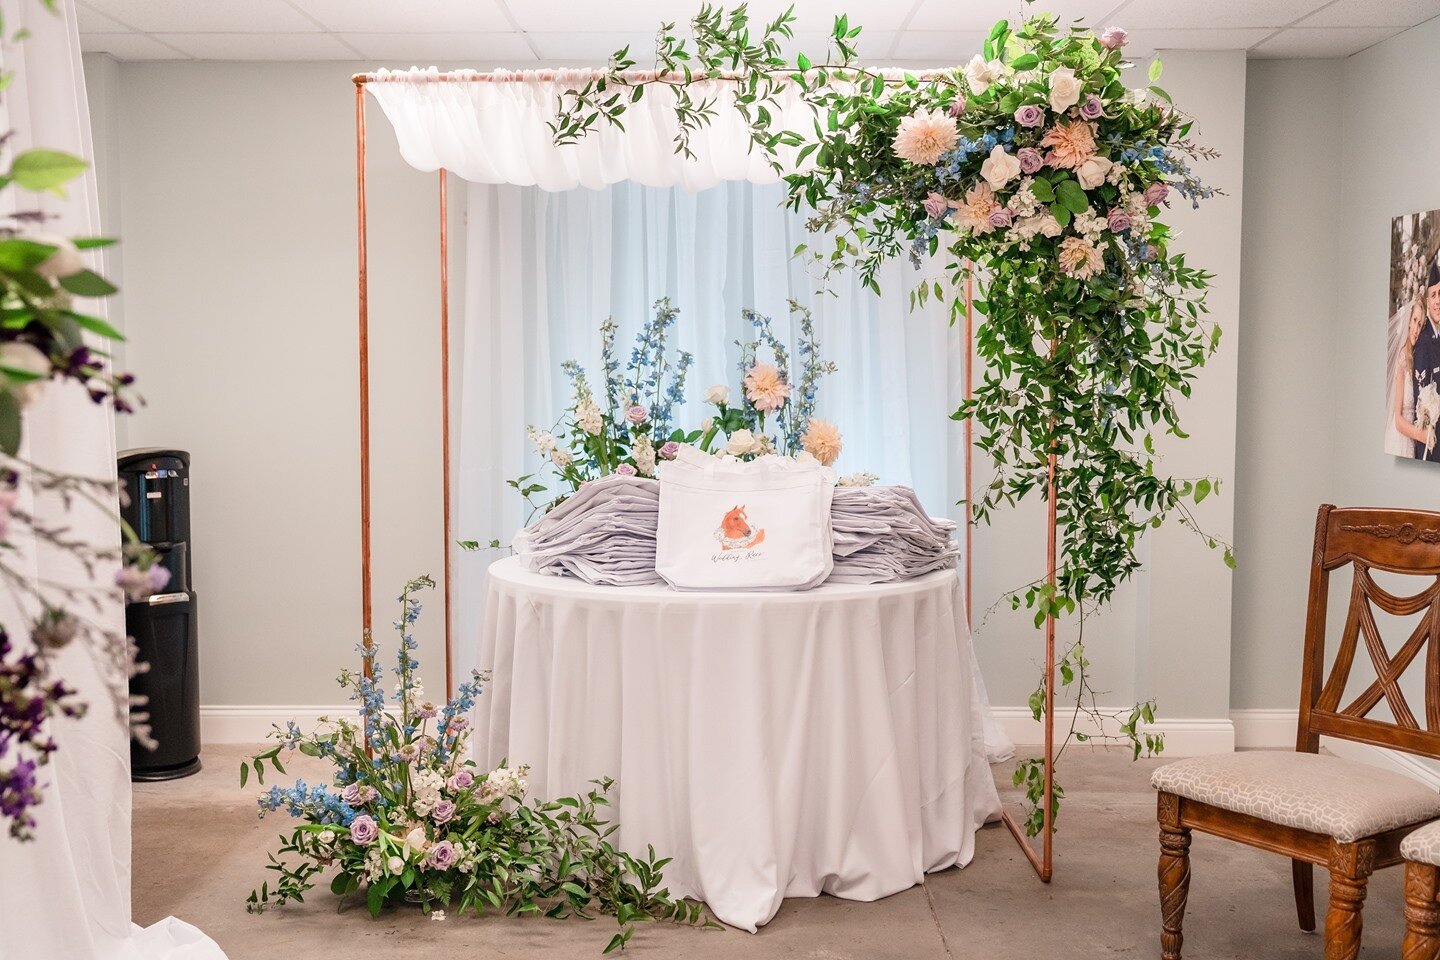 Allow us to bring your floral dream to life. With more than 10 arch structures and a warehouse full of floral rental items, we can help! Schedule an in-person consultation at the link in our bio. Vendors and Clients are welcome 😊
#orlandowedding #or